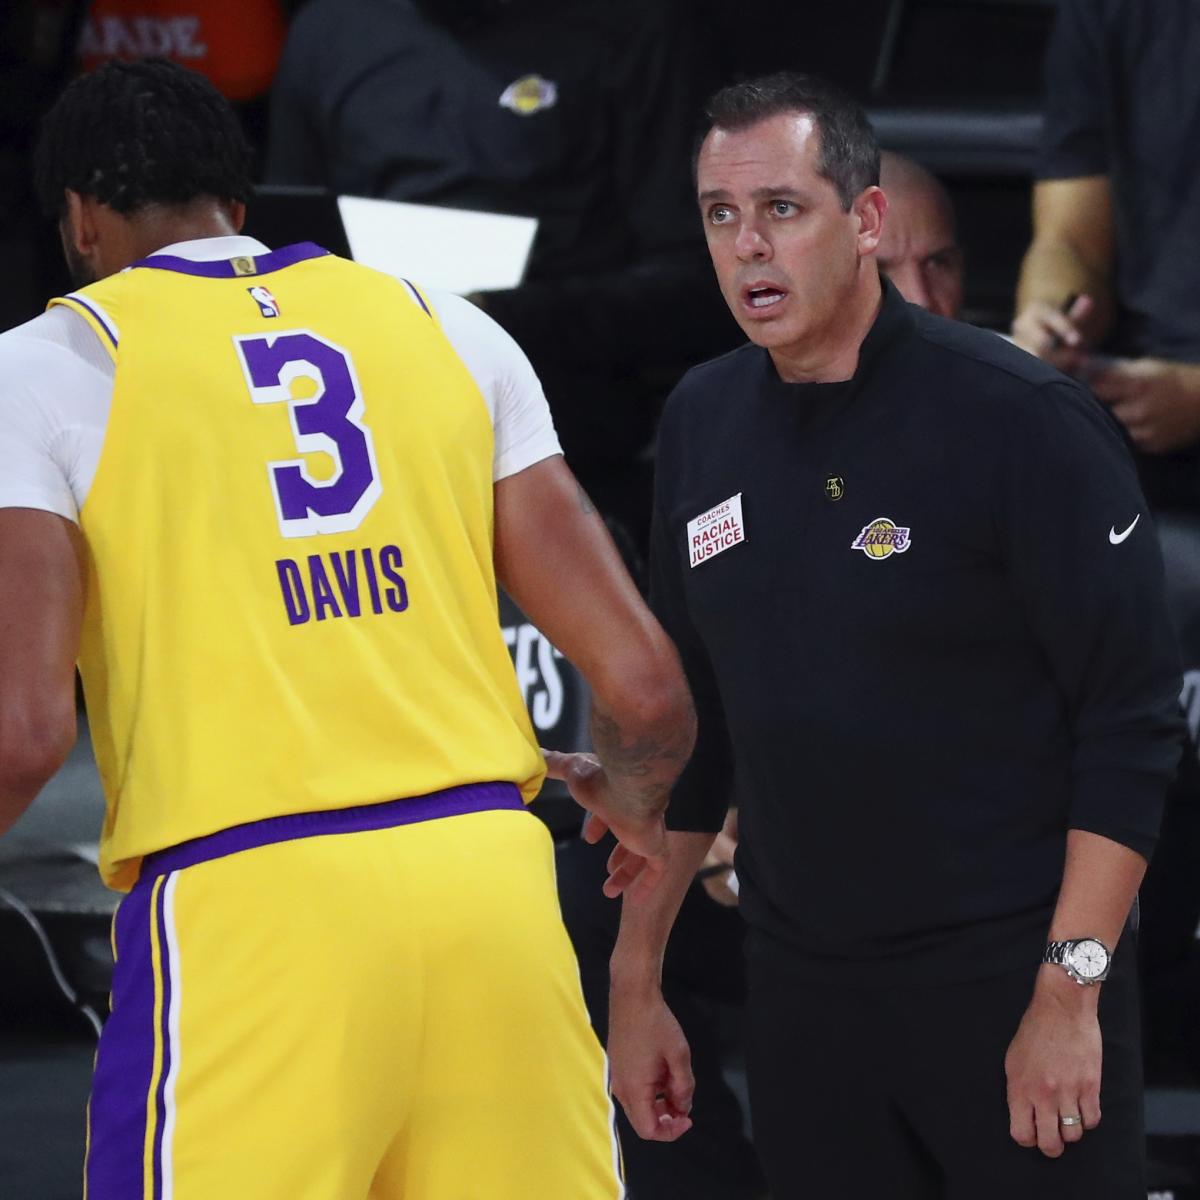 Frank Vogel Says Lakers ‘Gain a Ph.D in Coping with Adversity’ from 2019-20 Season